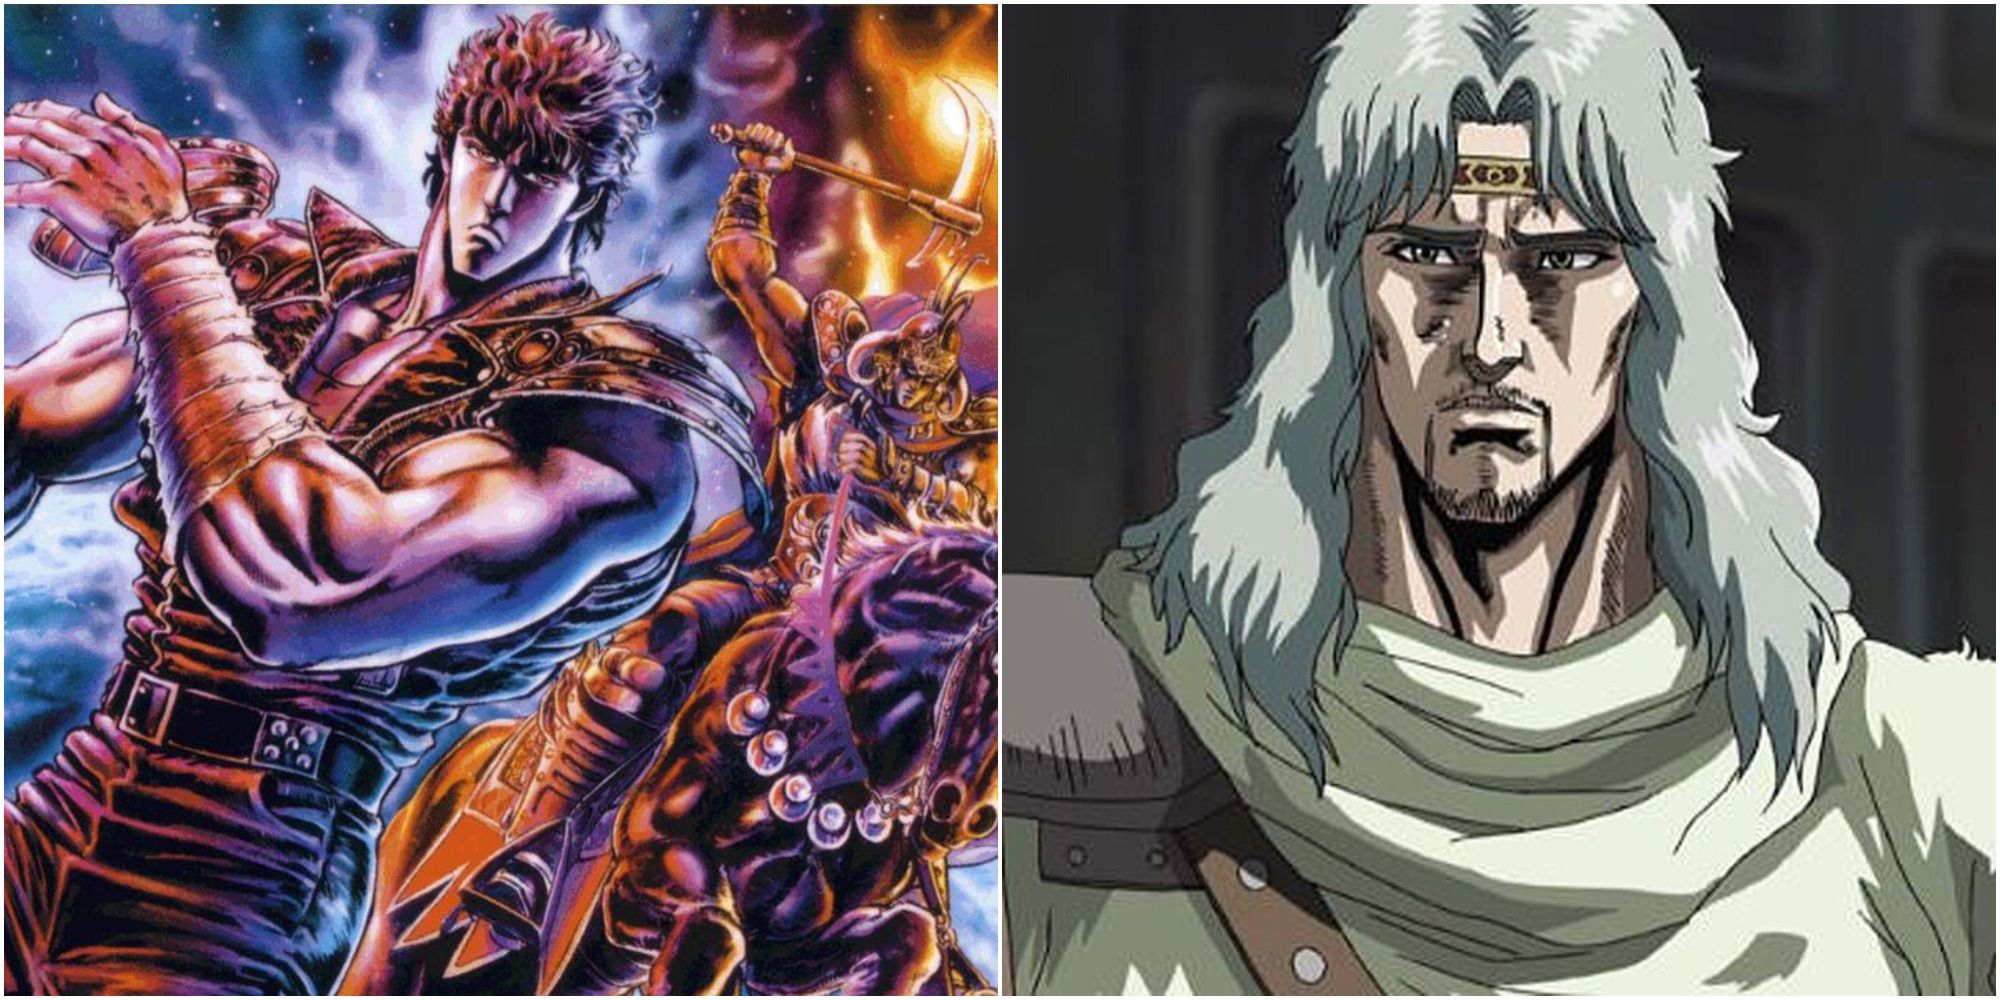 Kenshiro, Raoh and Toki from Fist of the North Star